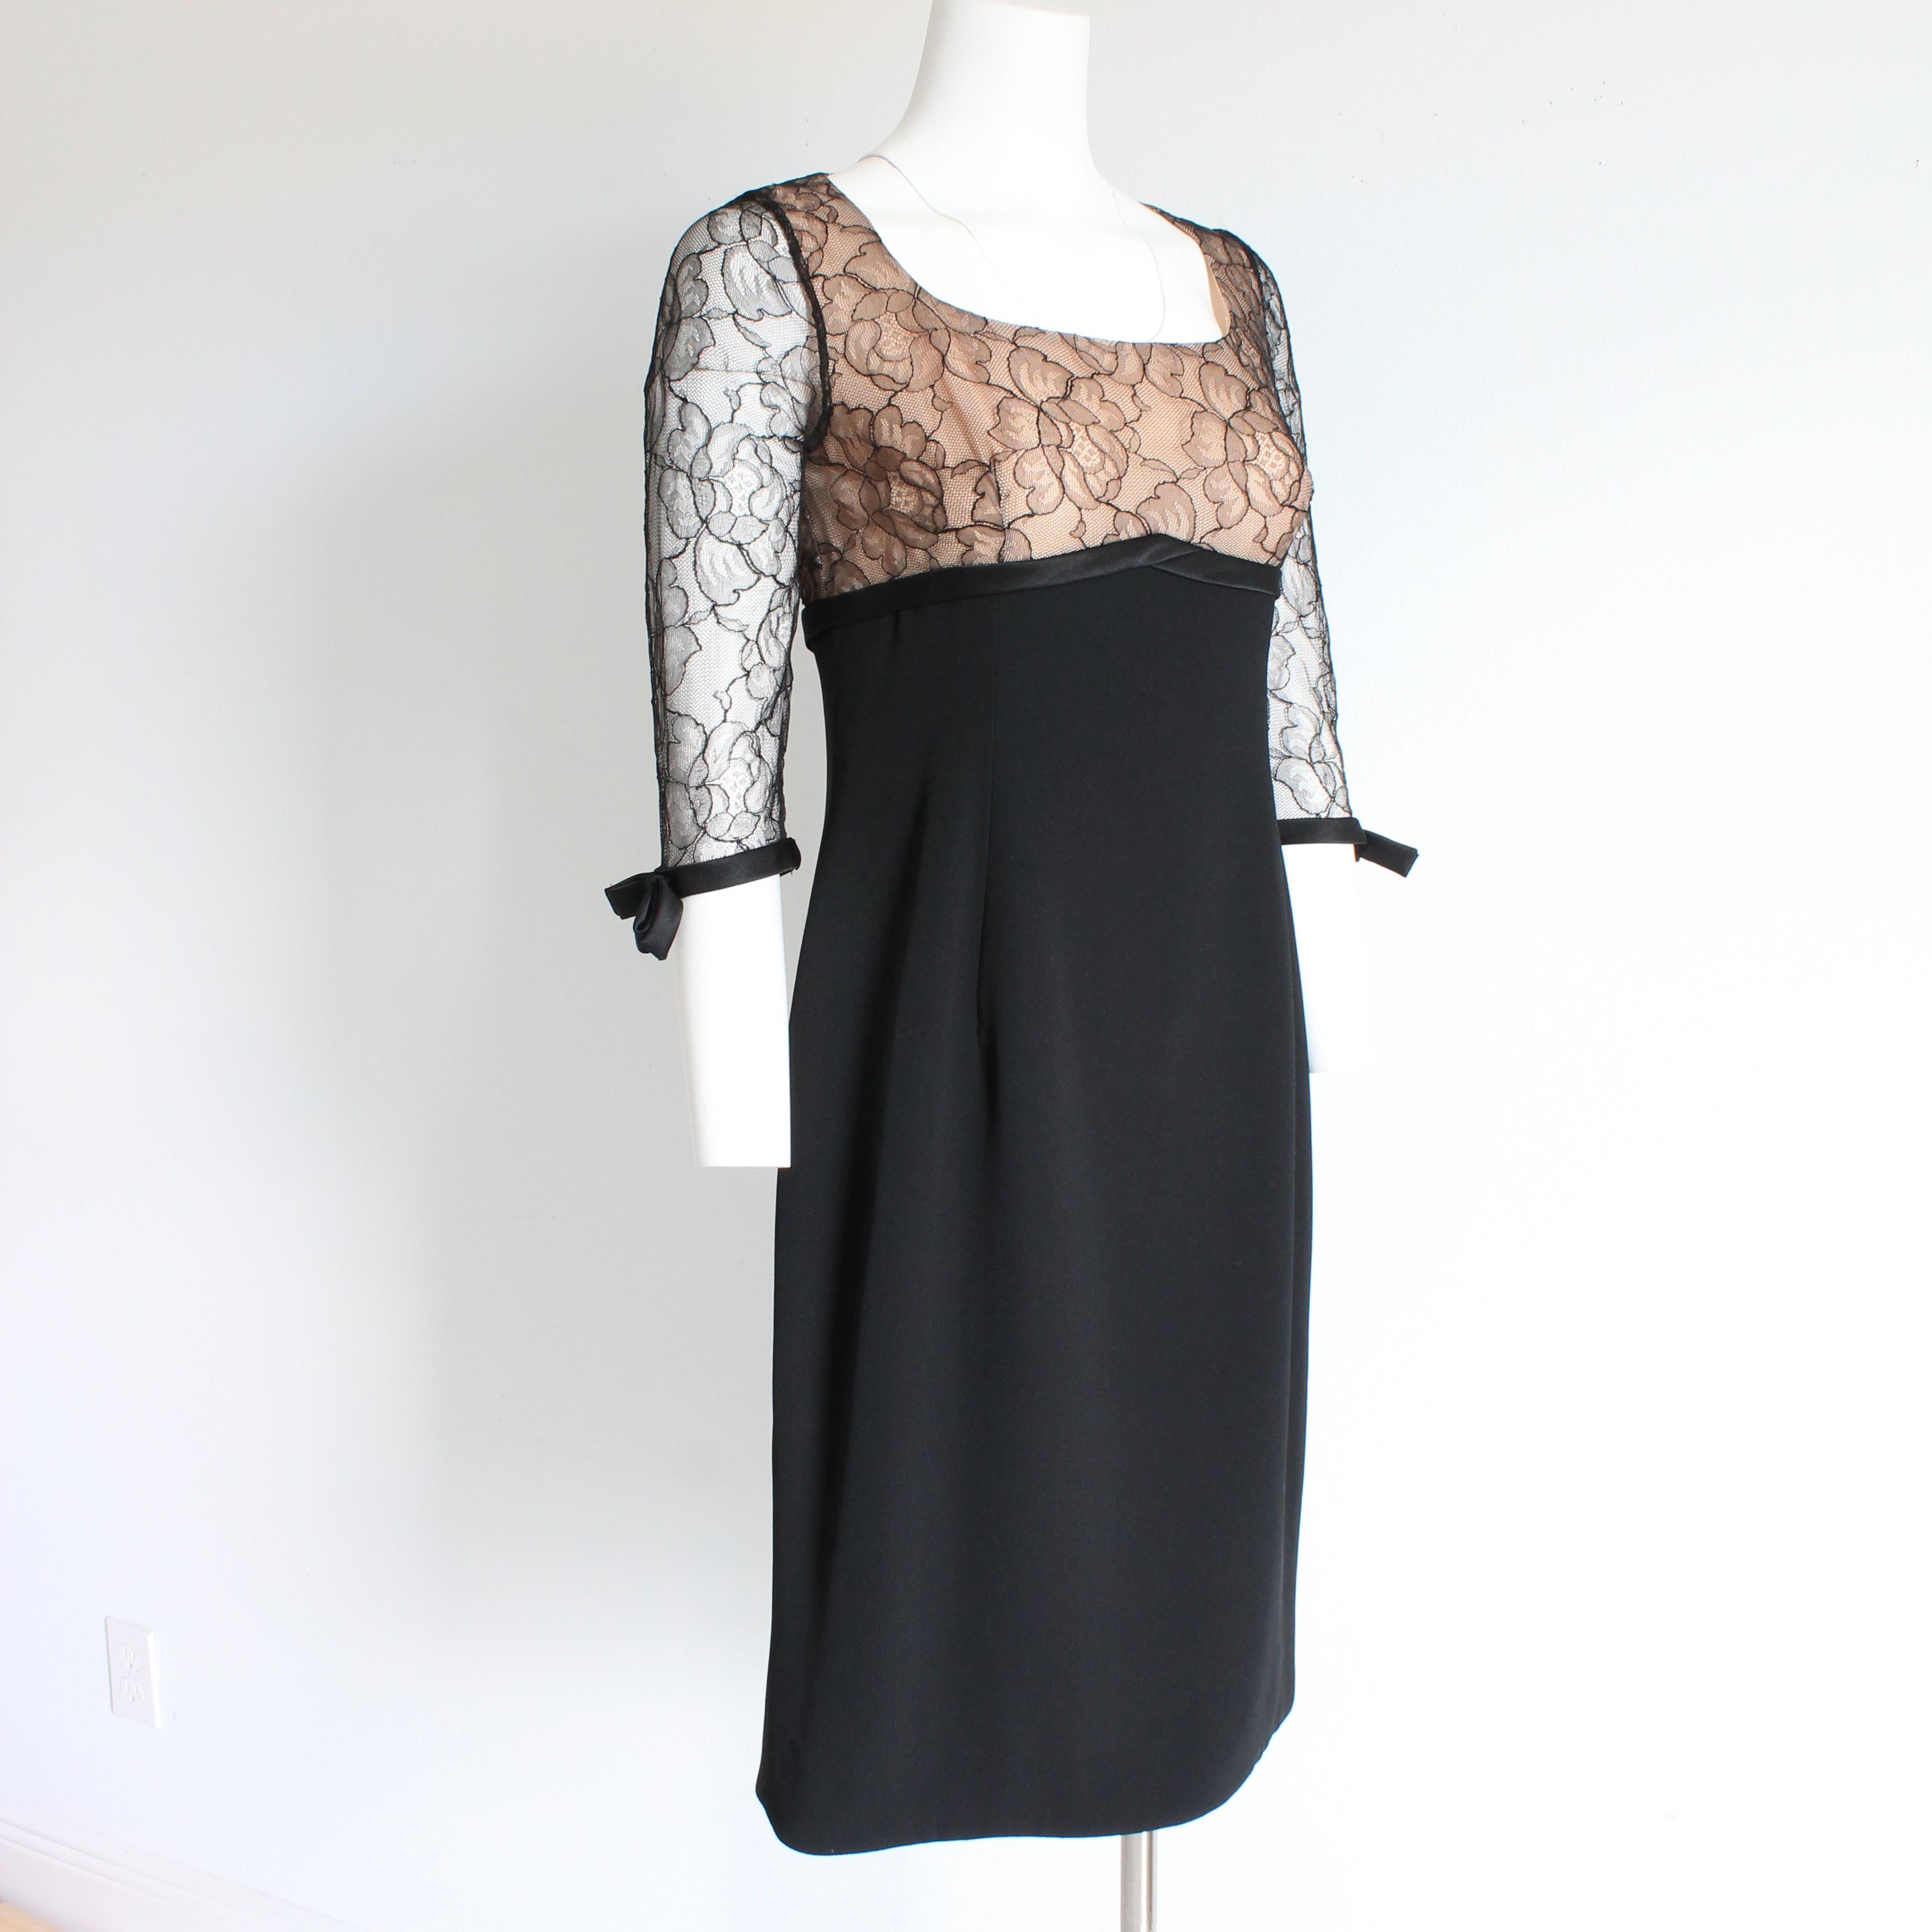 Travilla Cocktail Dress Black Illusion Lace Silk Ribbon Trim Size S Vintage 60s In Good Condition For Sale In Port Saint Lucie, FL